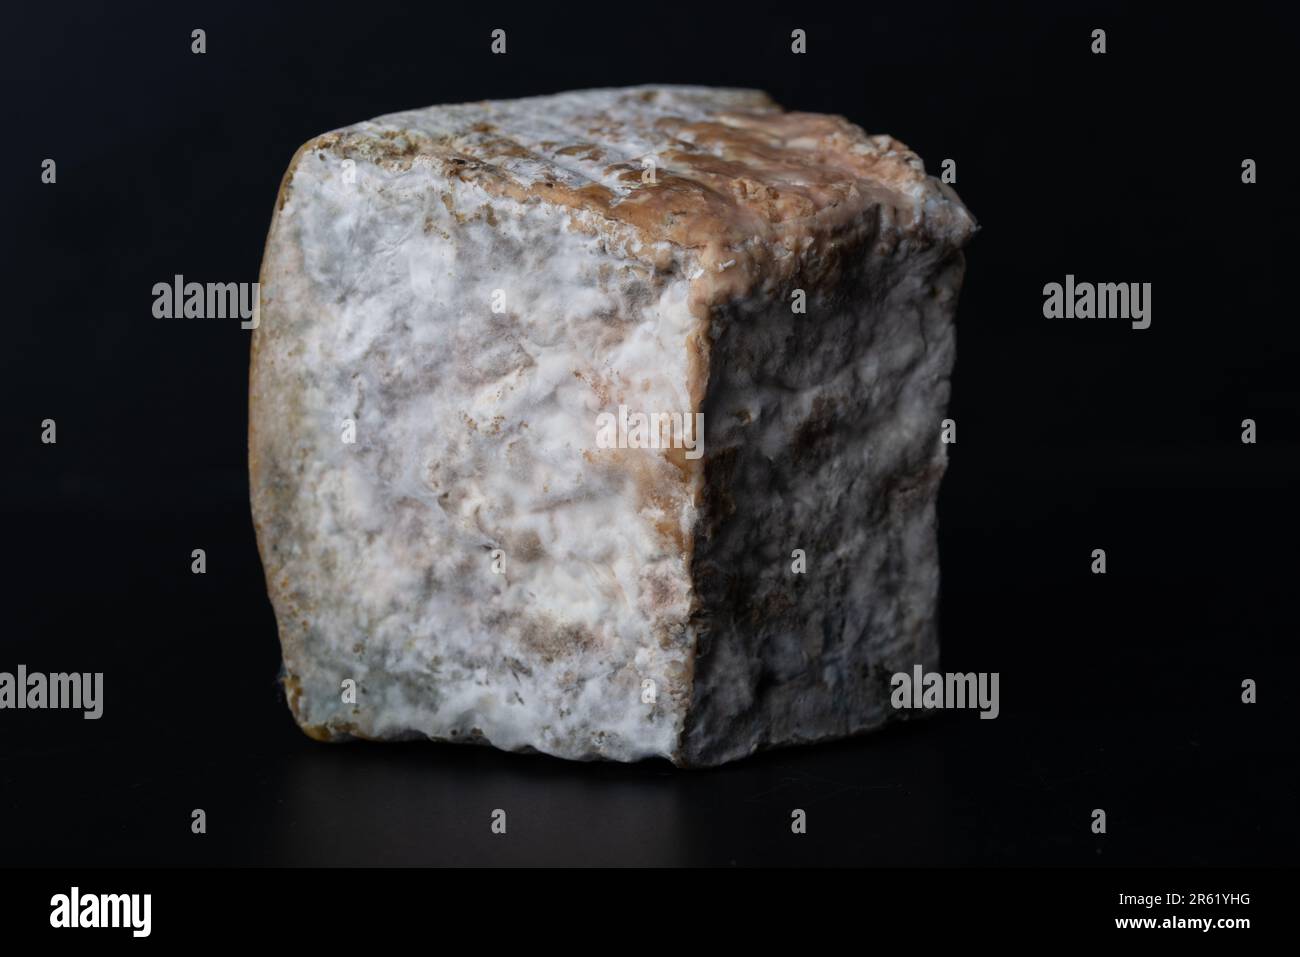 Piece of cheese fermented by bacteria with fungus and mold Stock Photo